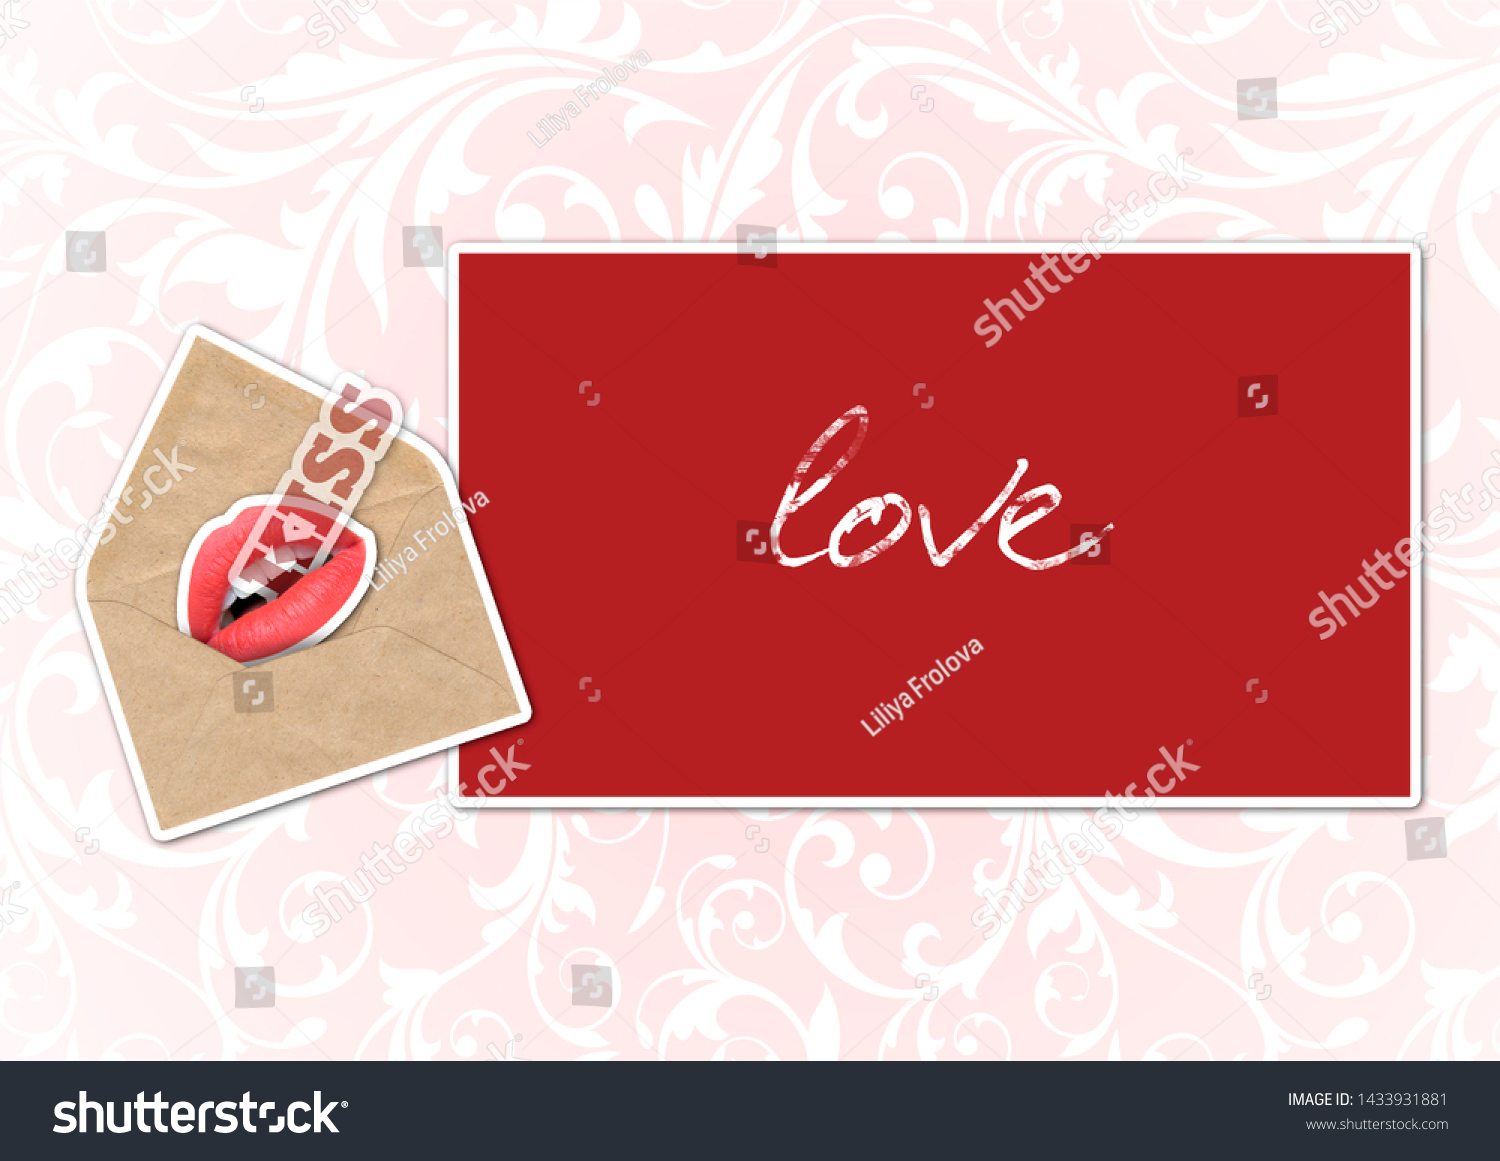 Letter To Your Loved One from image.shutterstock.com